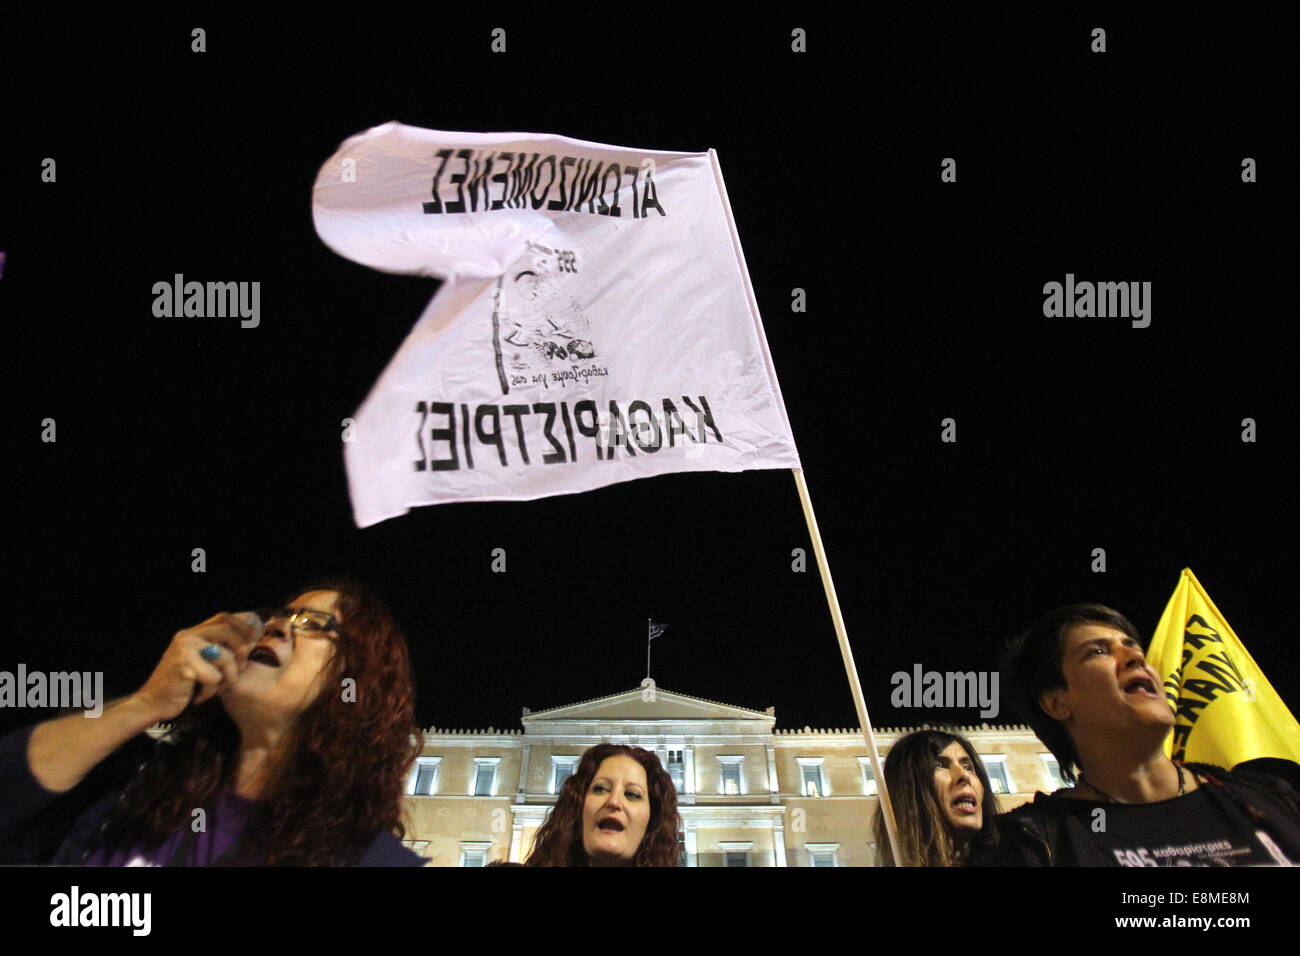 Athens, Greece. 10th Oct, 2014. Protestors shout slogans outside the Greek Parliament building during a rally in Athens, Greece, Oct. 10, 2014. Greek Parliament will vote Friday on a confidence motion proposed by Greek Government. According to local political analysts, the government is expected to easily win the roll-call vote sought by Greek Prime Minister Antonis Samaras in an effort to halt early general elections. Credit:  Marios Lolos/Xinhua/Alamy Live News Stock Photo